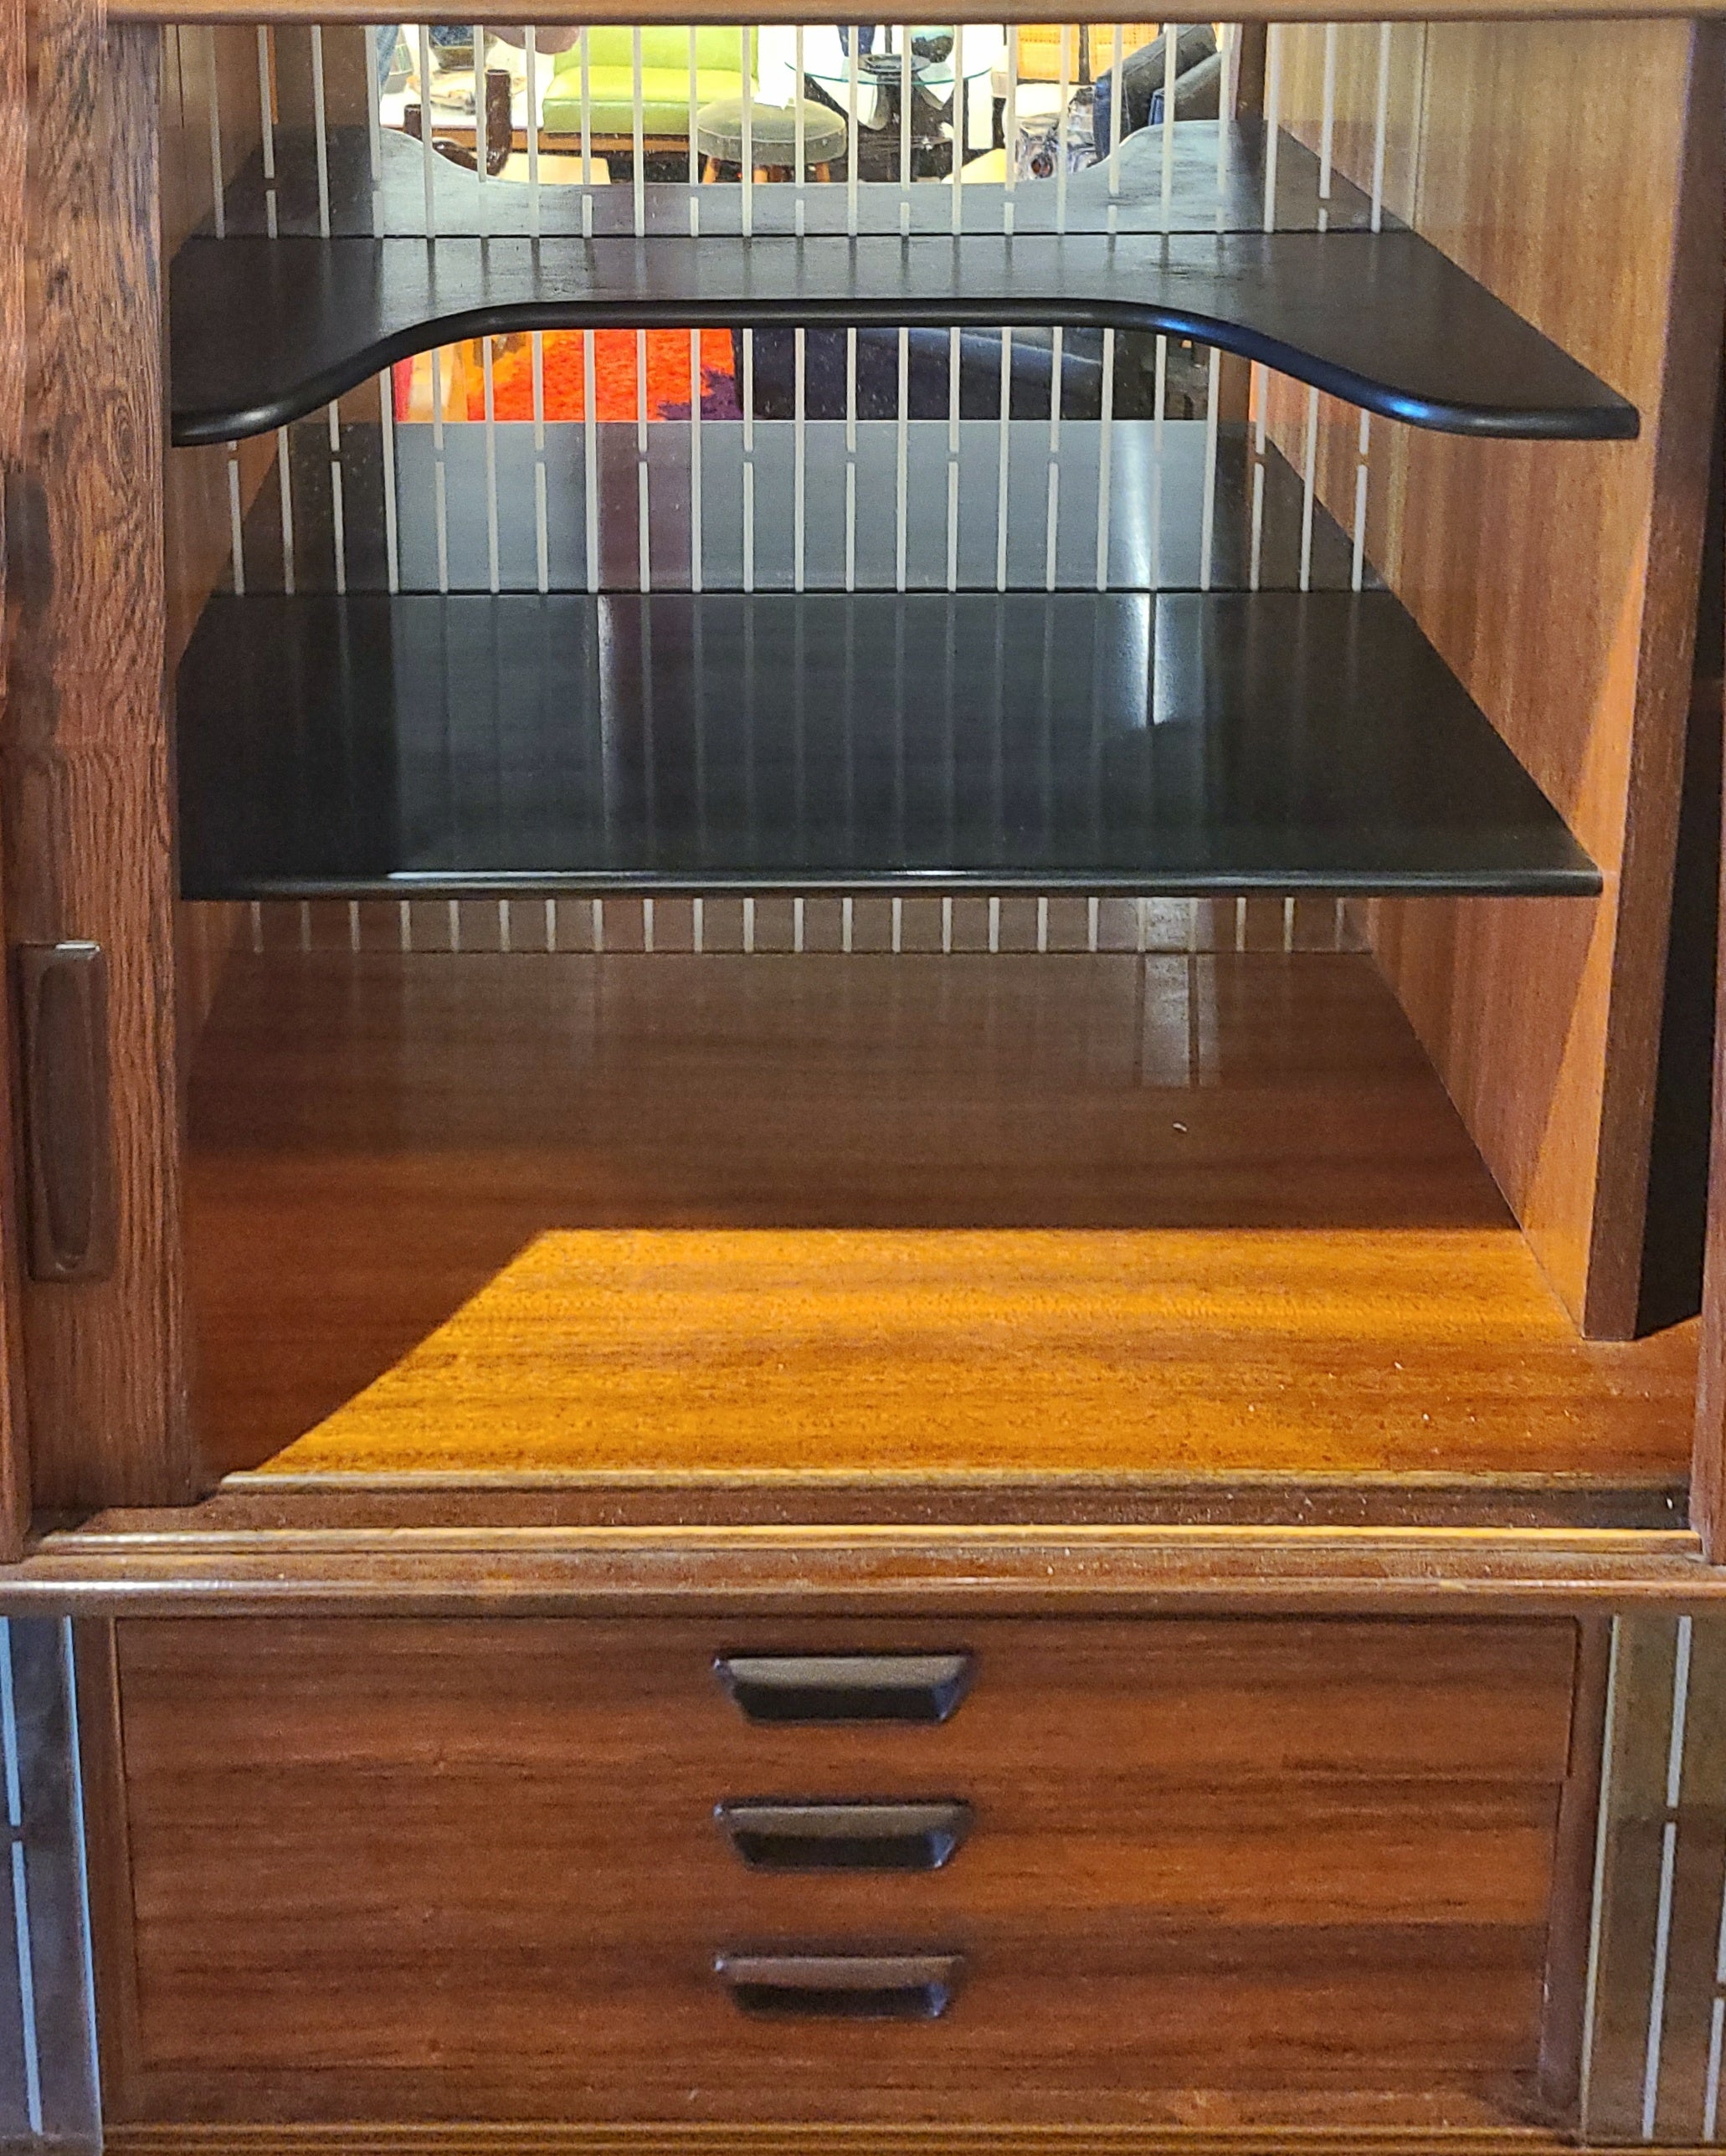 DANISH MODERN ROSEWOOD COCKTAIL CABINET/SIDEBOARD BY POUL JESSEN